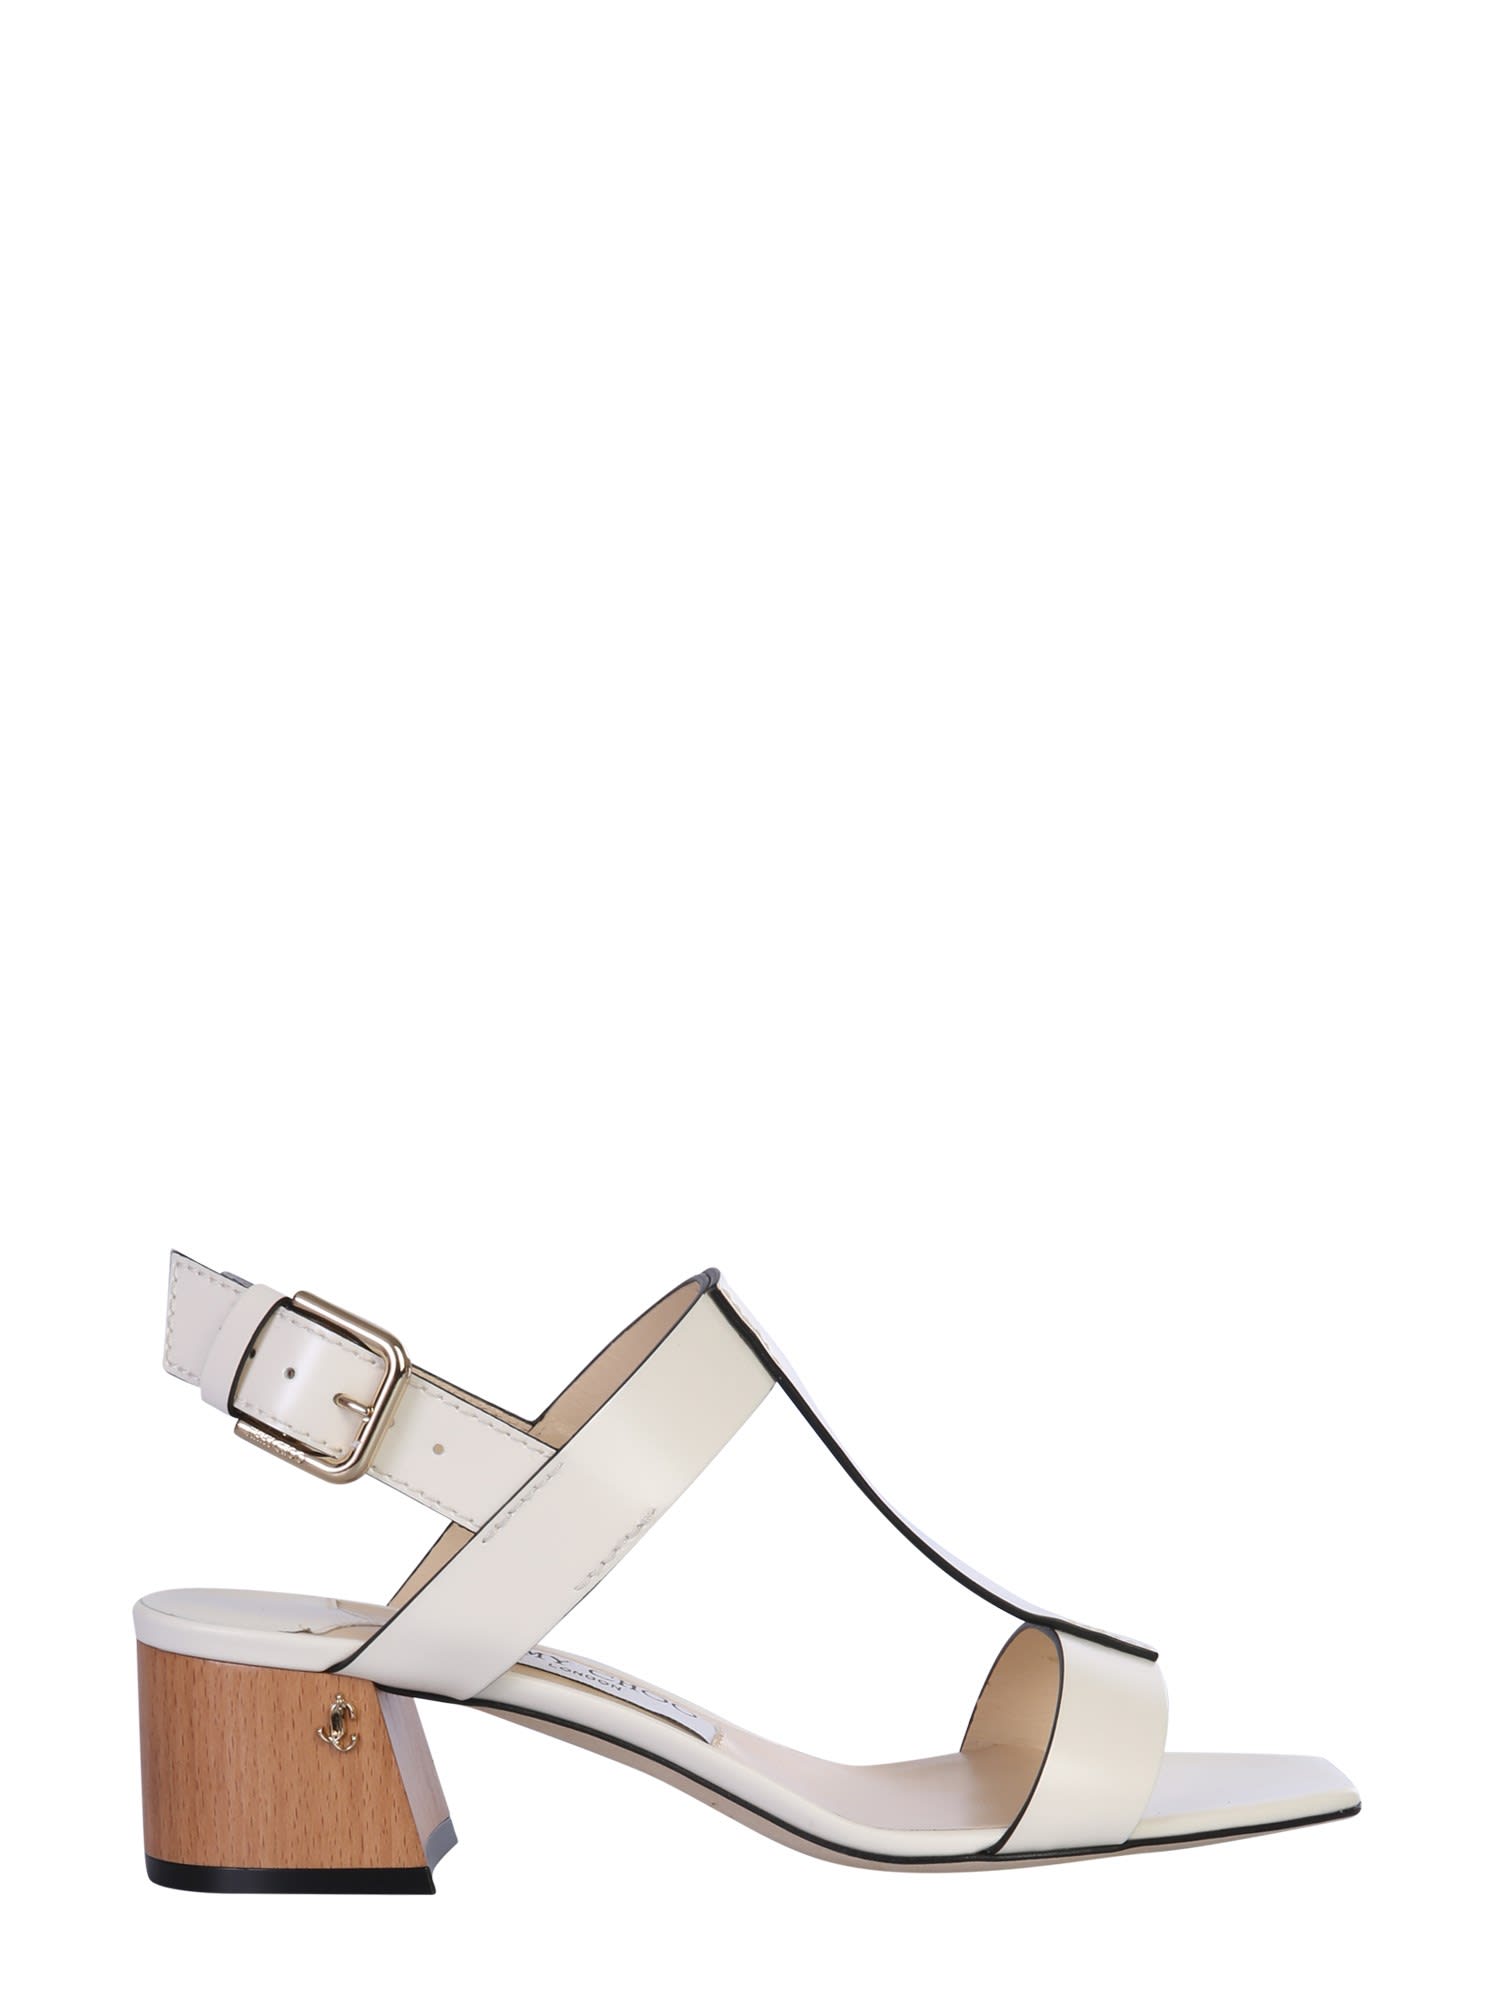 Buy Jimmy Choo Jin45 Sandals online, shop Jimmy Choo shoes with free shipping